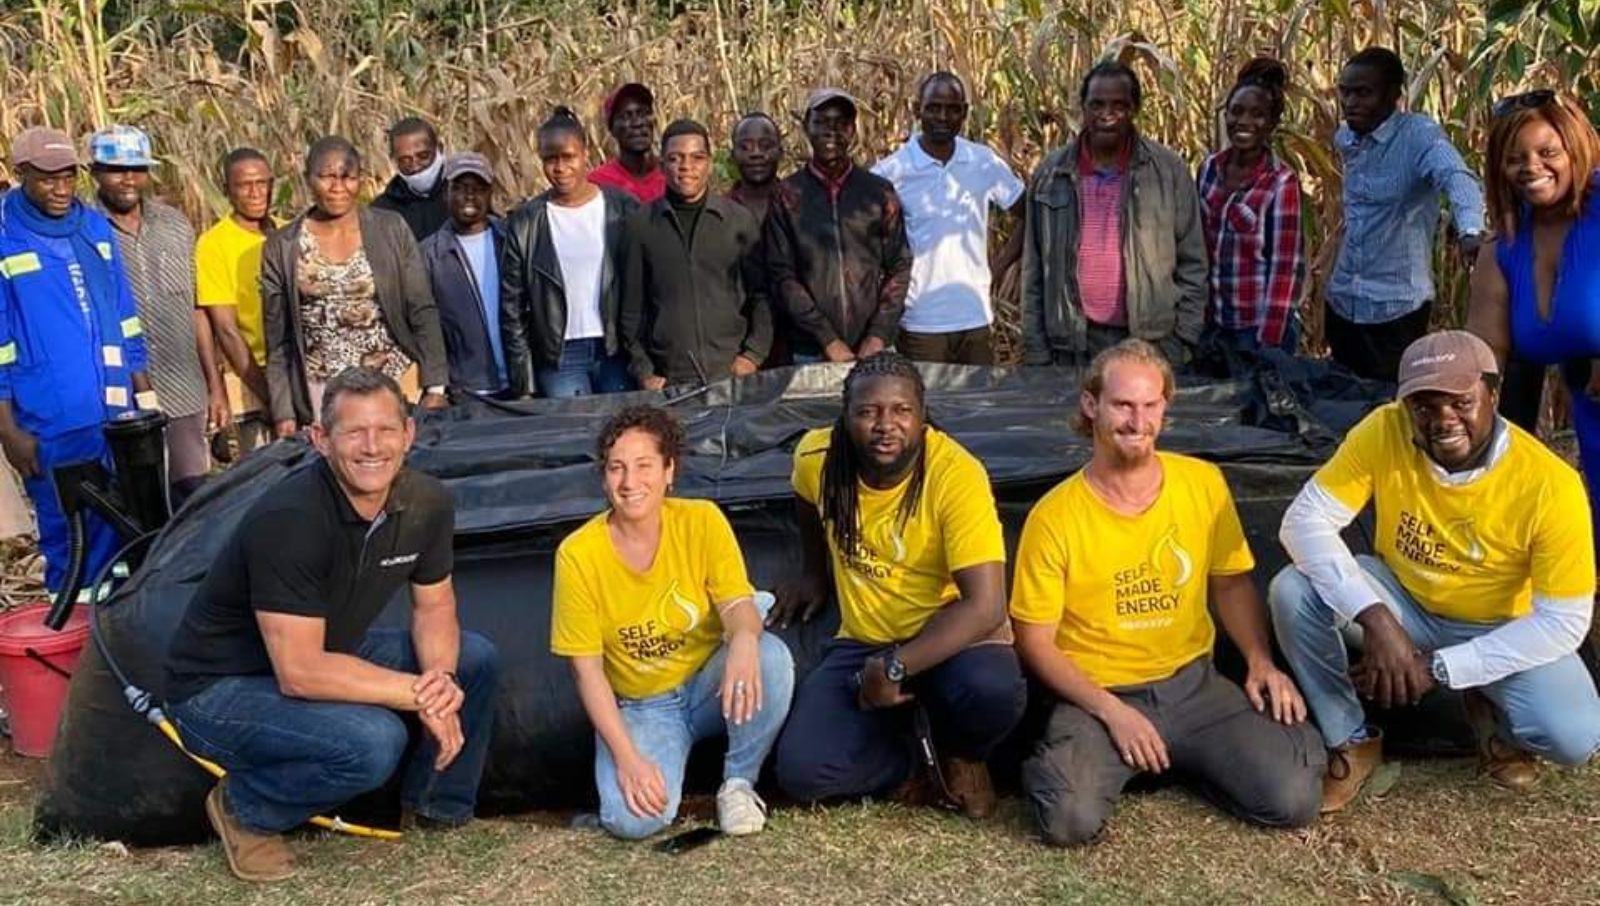 HomeBiogas Wins UN Deal To Convert Waste In Refugee Camps